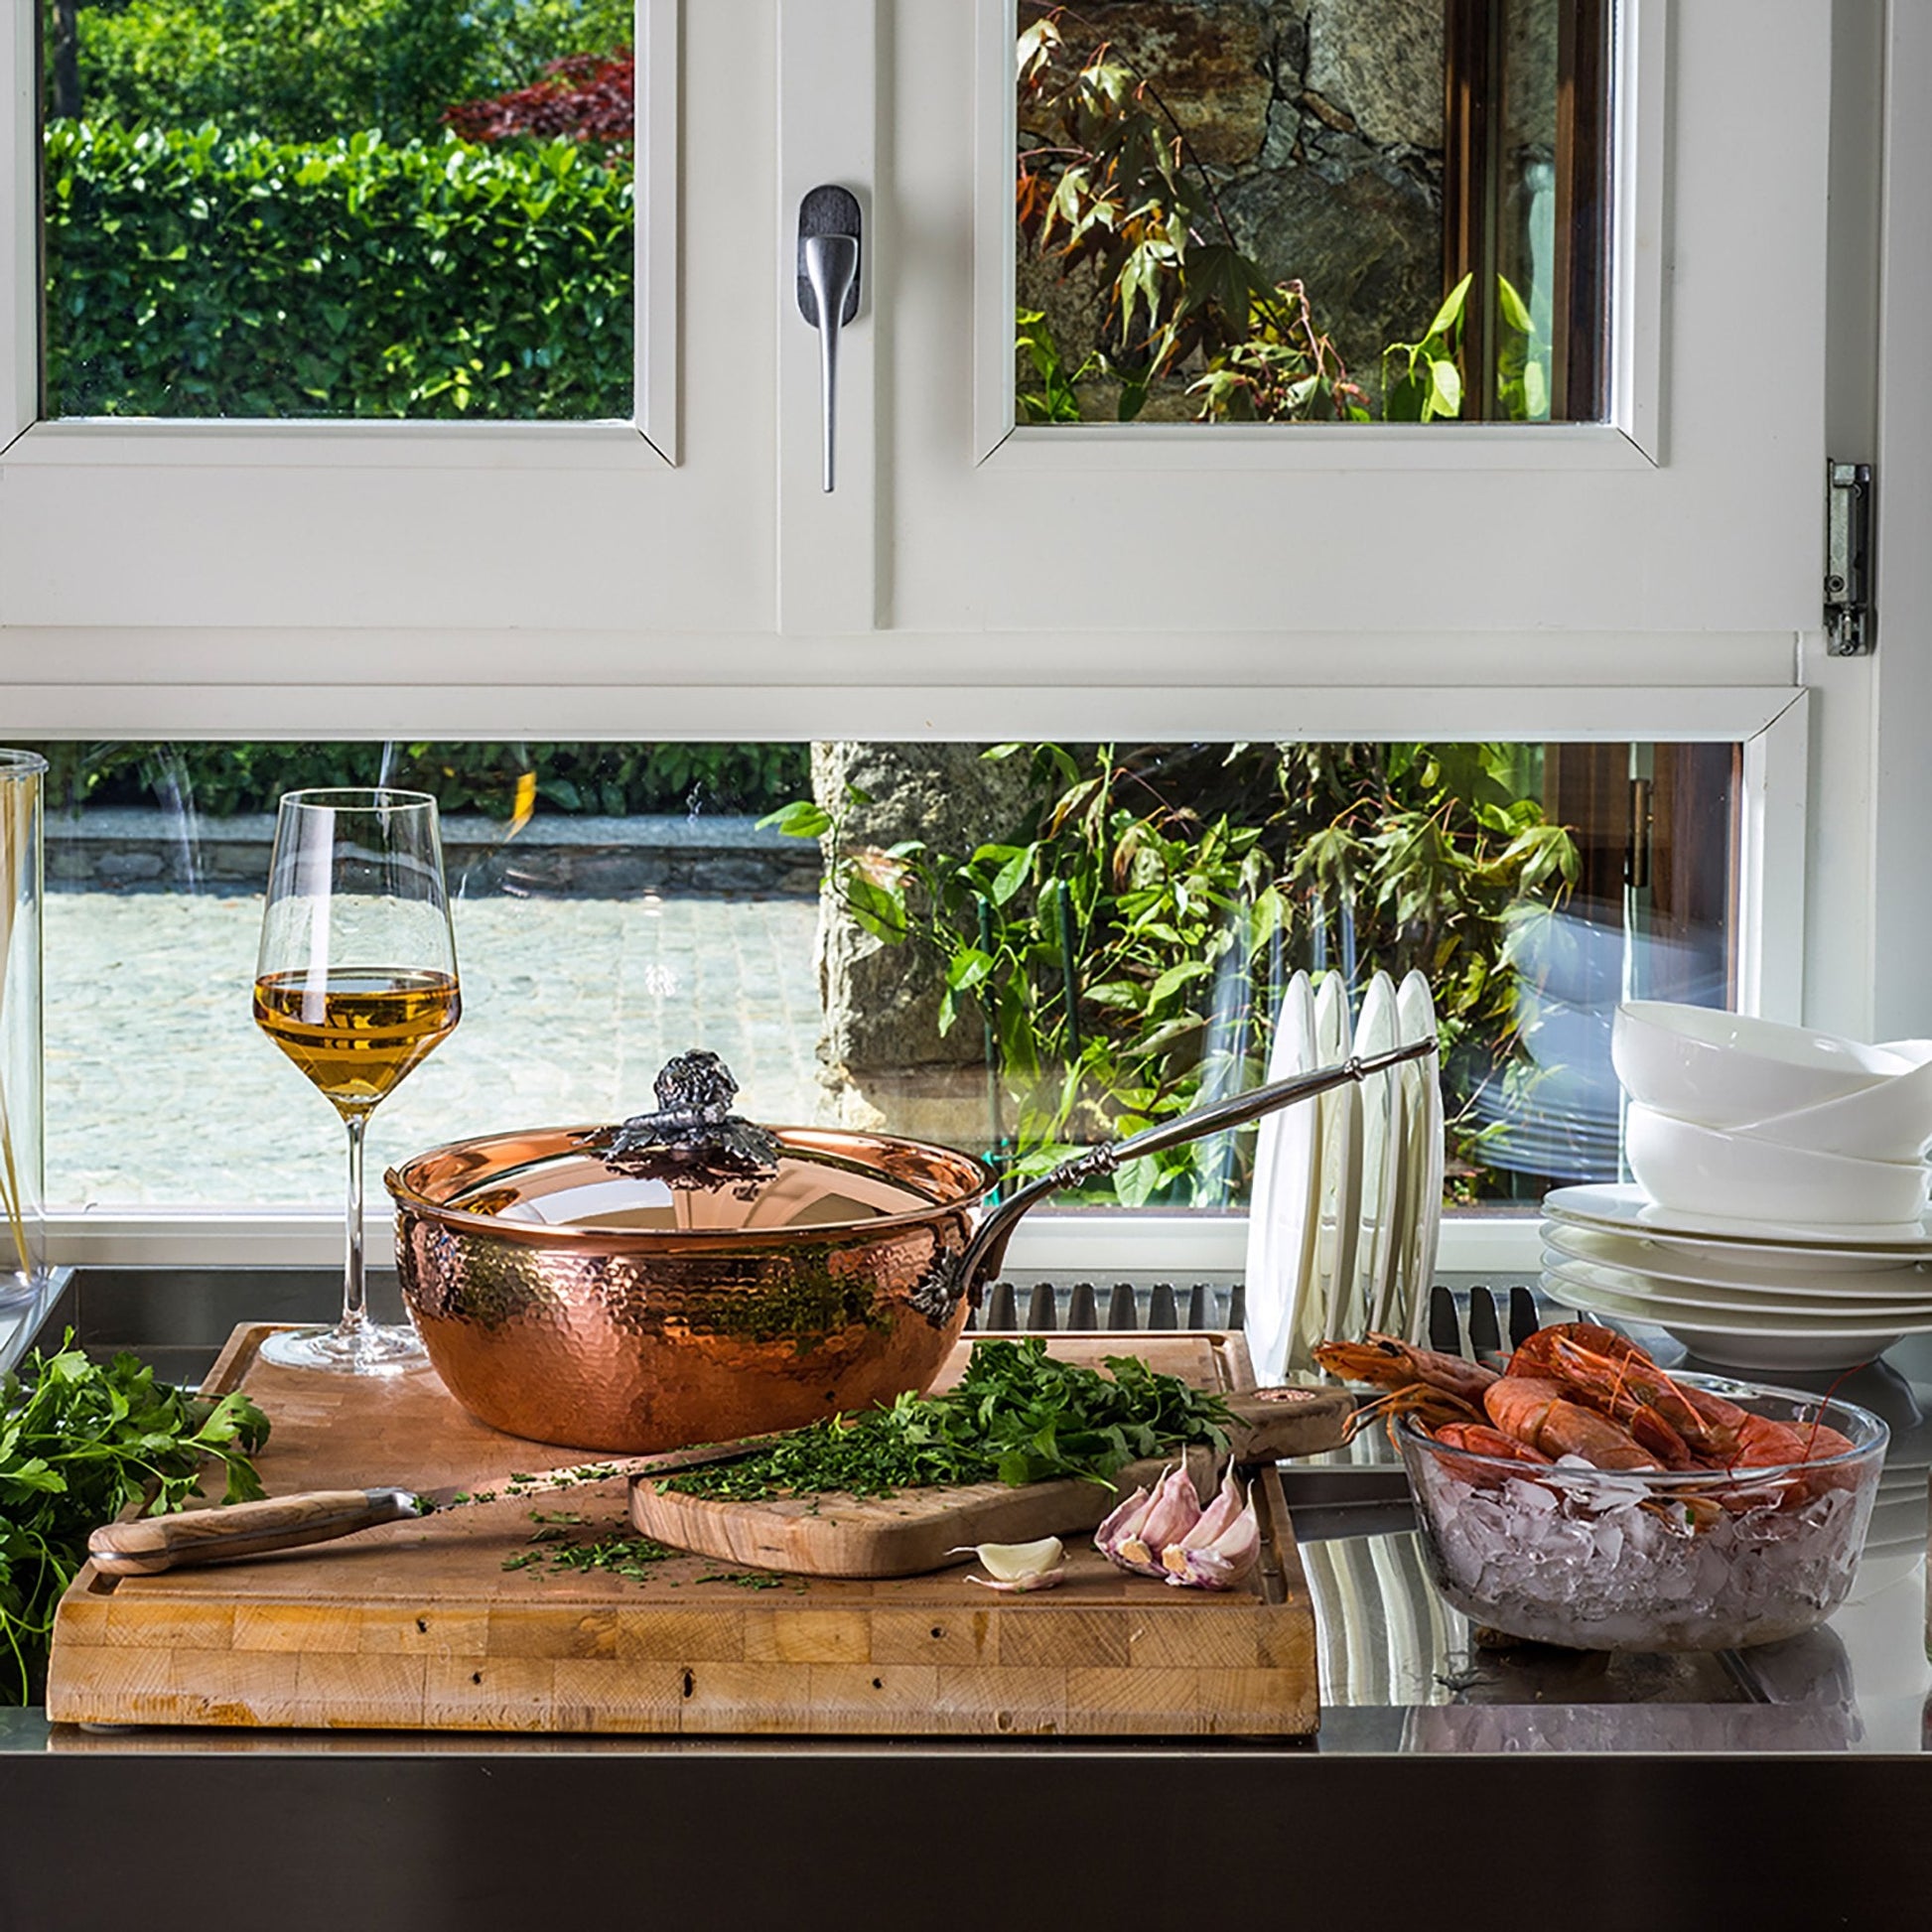 Hand-hammered, copper chef pan with stainless steel lining in the kitchen with chopped herbs and shellfish